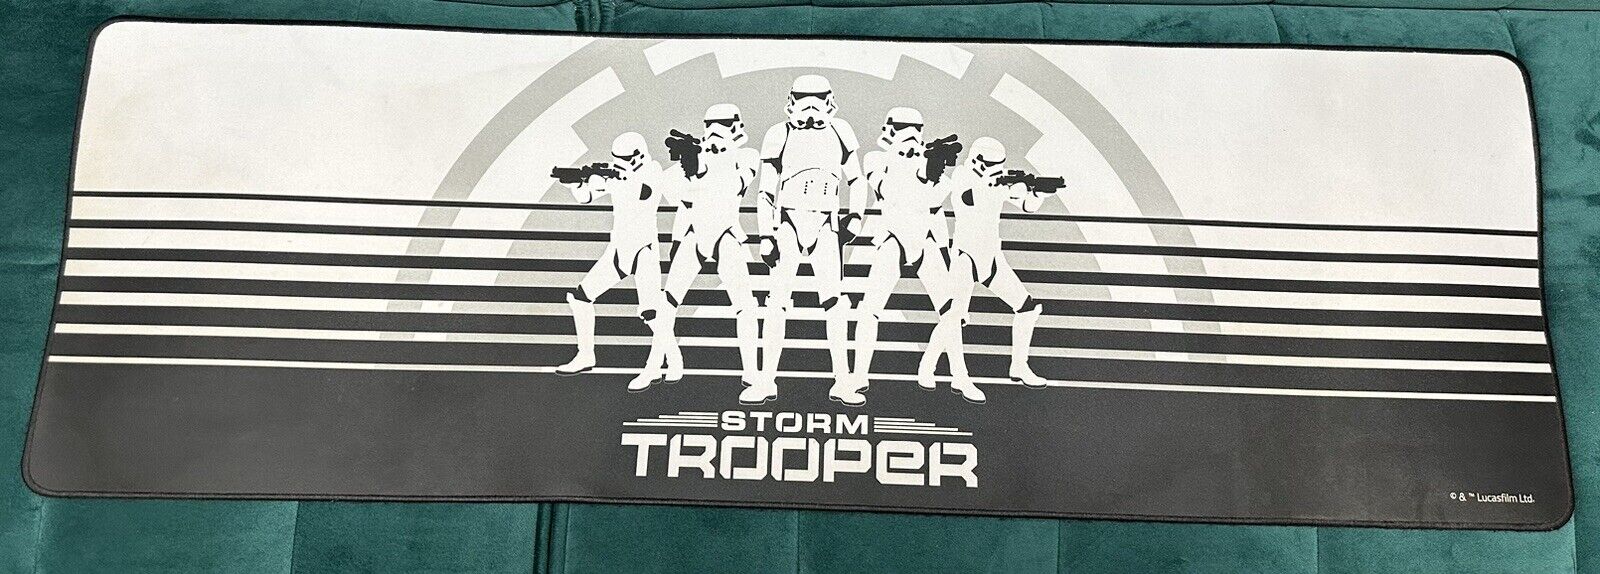 Razer - Goliathus Extended Star Wars Stormtrooper Edition Gaming Mouse Pad